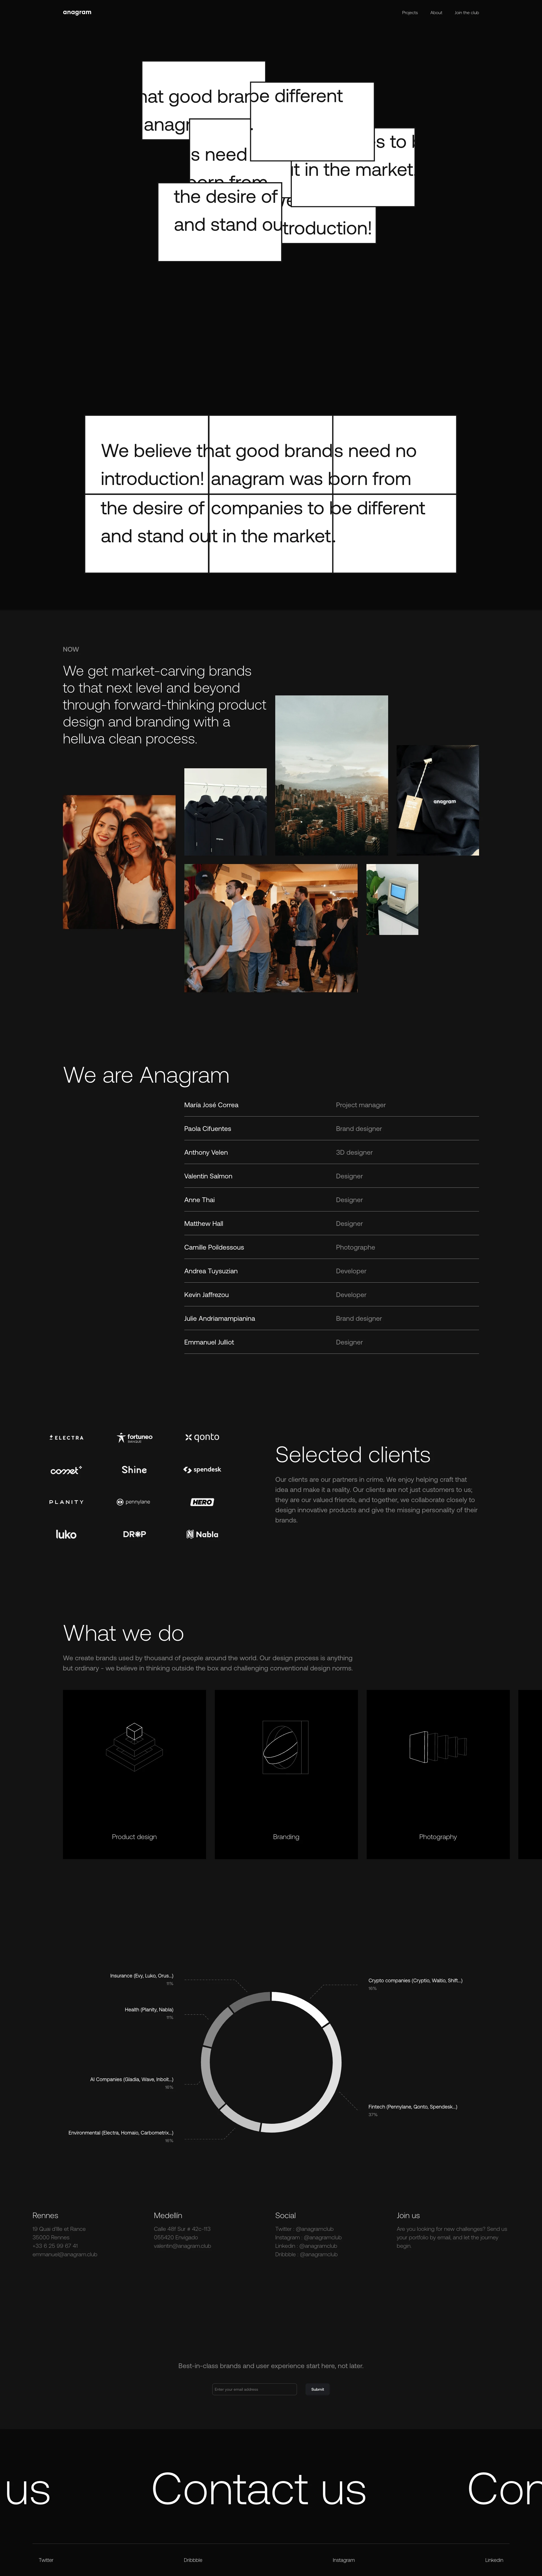 Anagram Club Landing Page Example: Shaping brands that need no introduction. We get market-carving brands to that next step and beyond through forward-thinking product design and a helluva clean process. And yes, we do branding too.